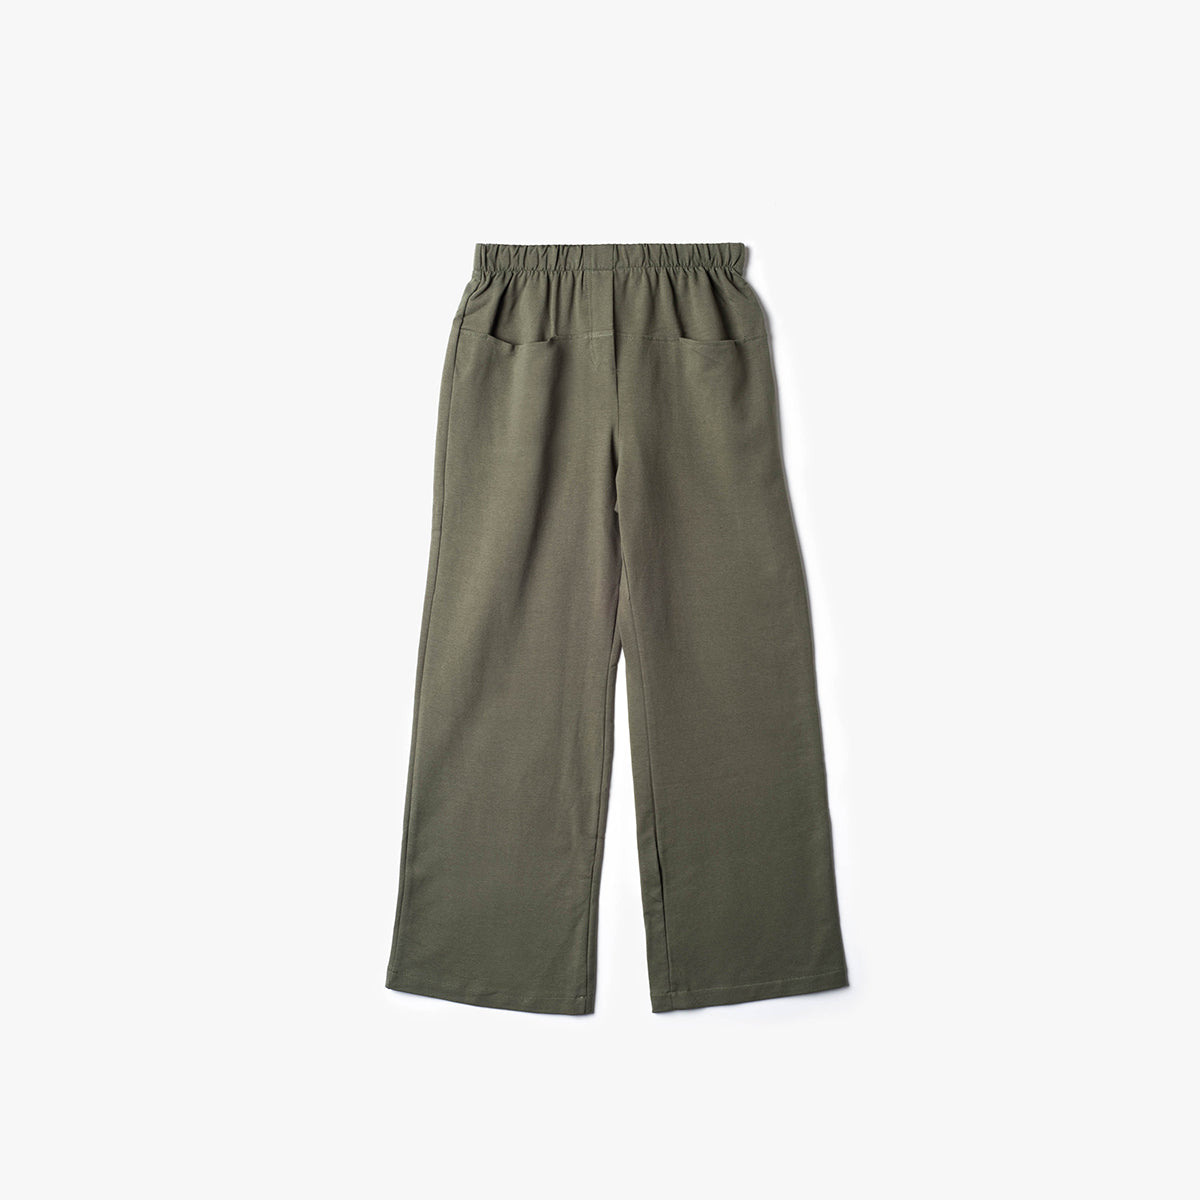 Comfy trousers with pocket detail